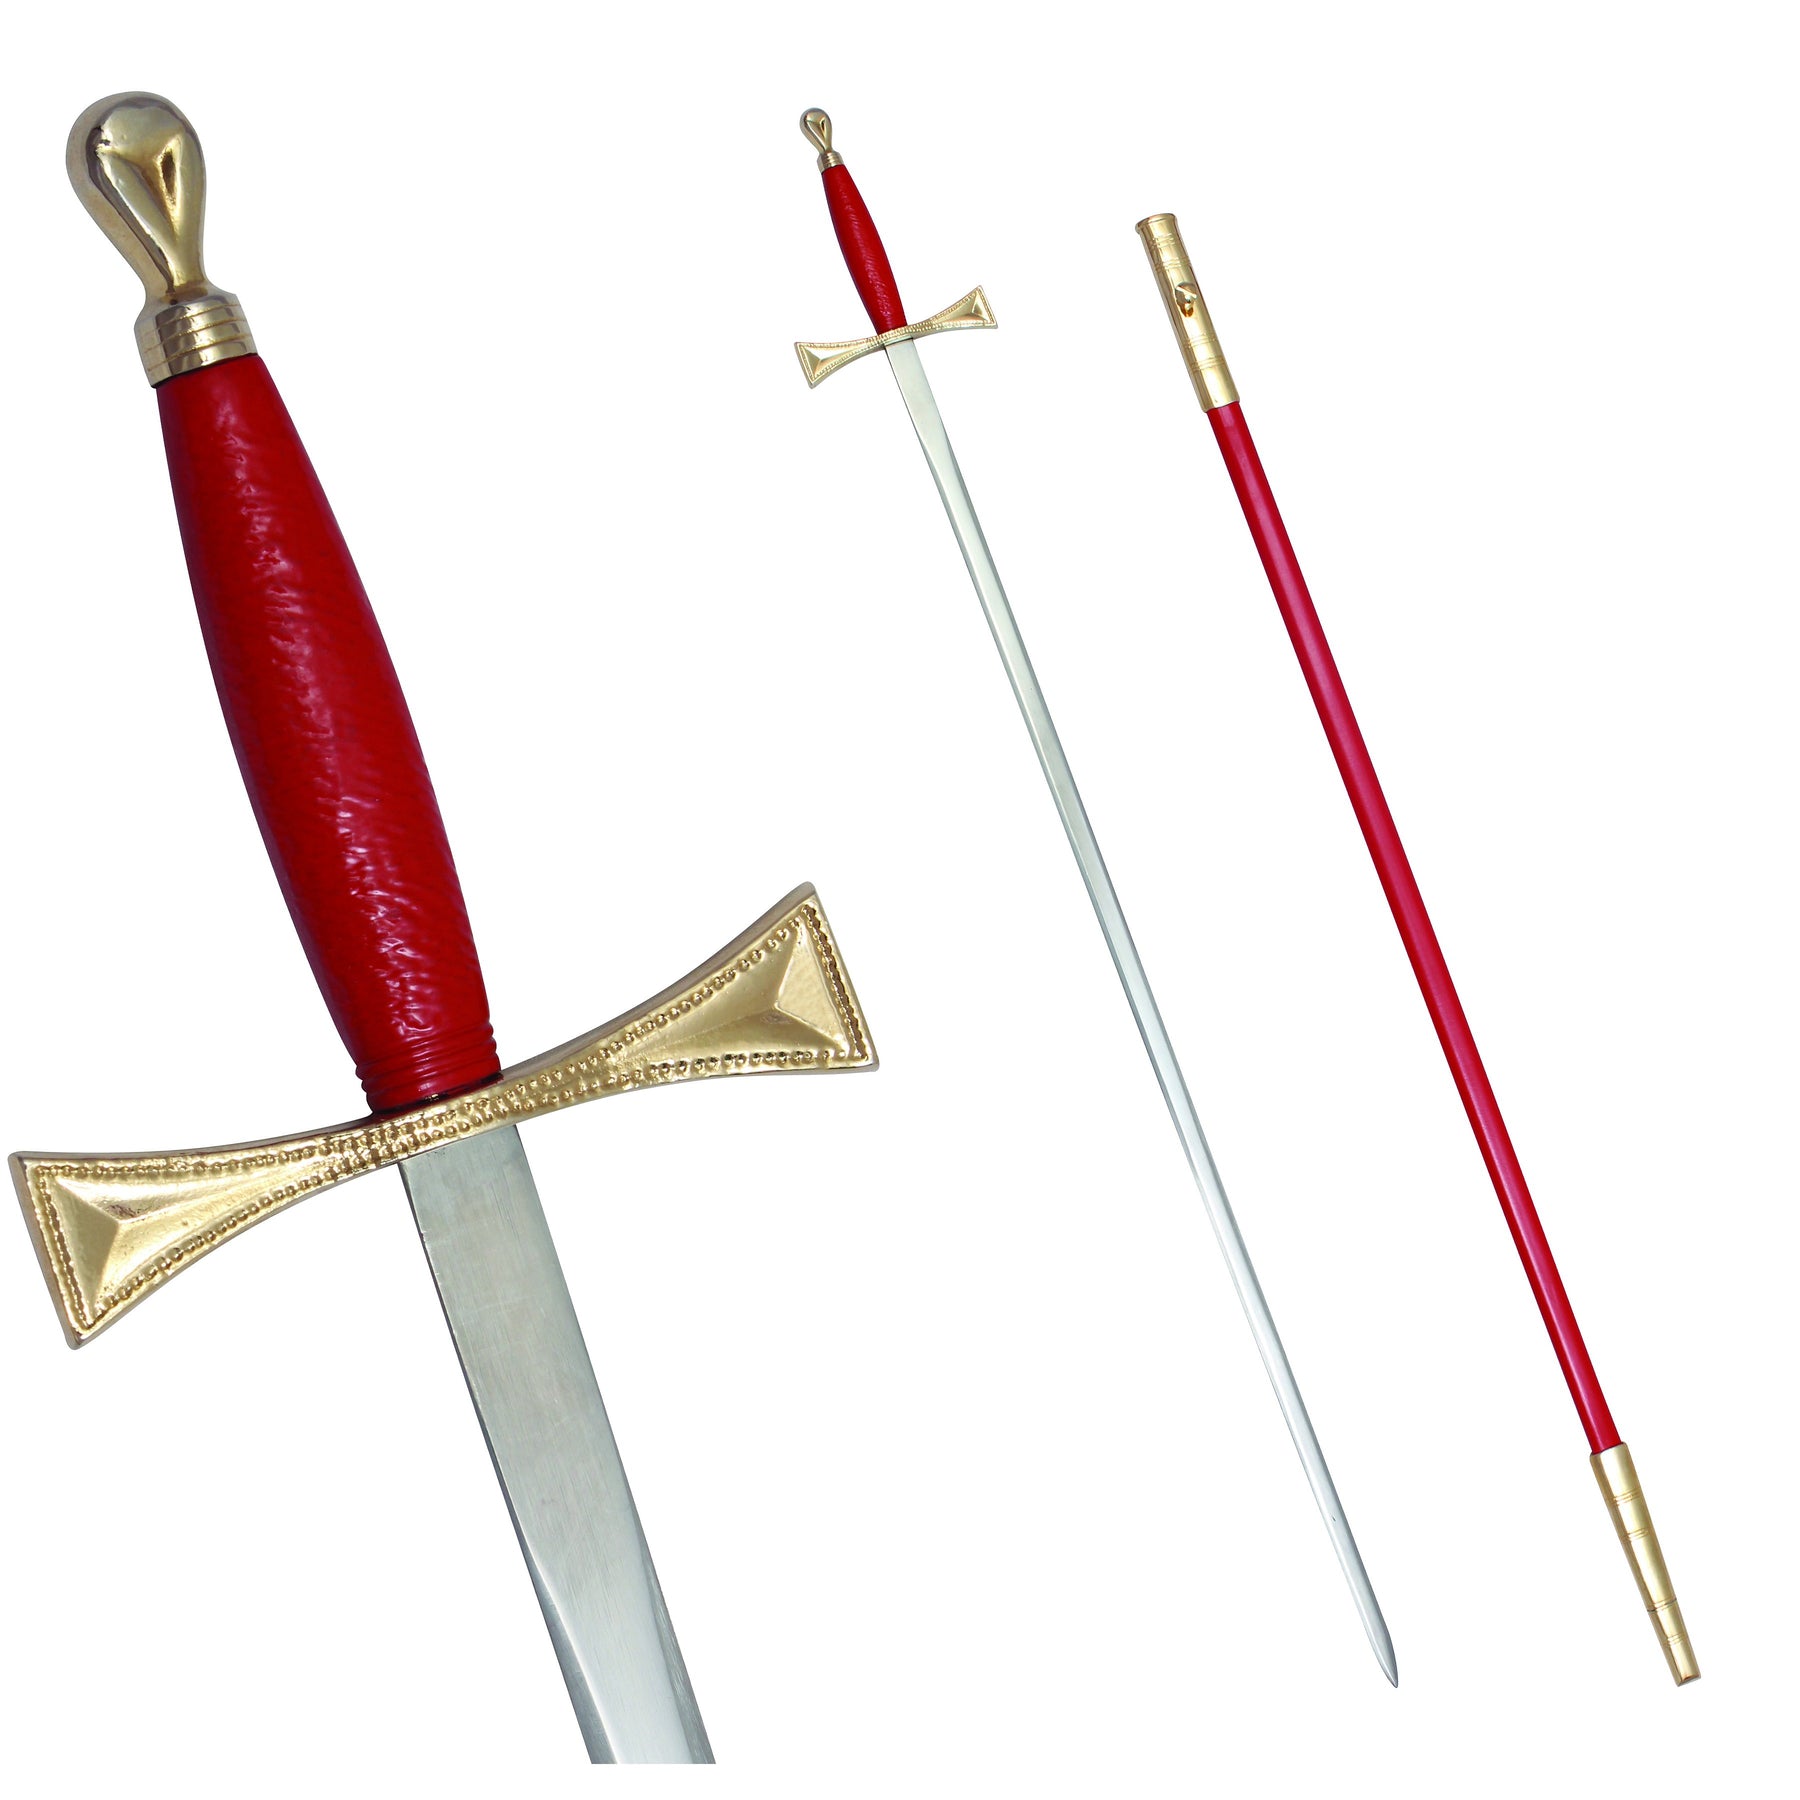 Masonic Sword with Red Gold Hilt and Red Scabbard 35 3/4" + Free Case - Bricks Masons